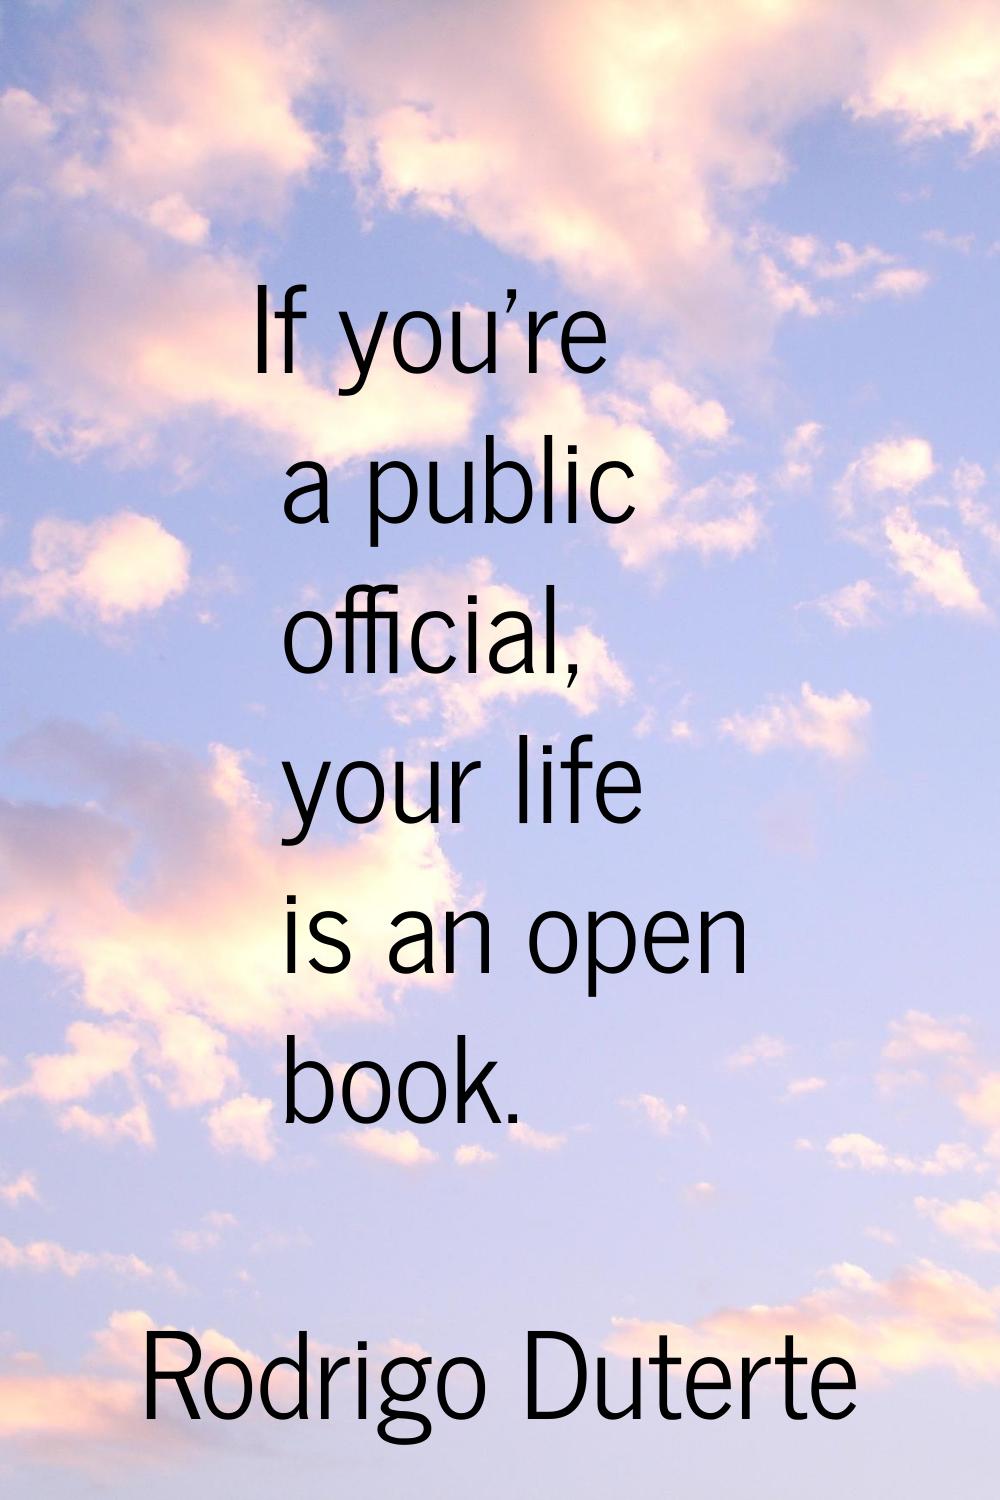 If you're a public official, your life is an open book.